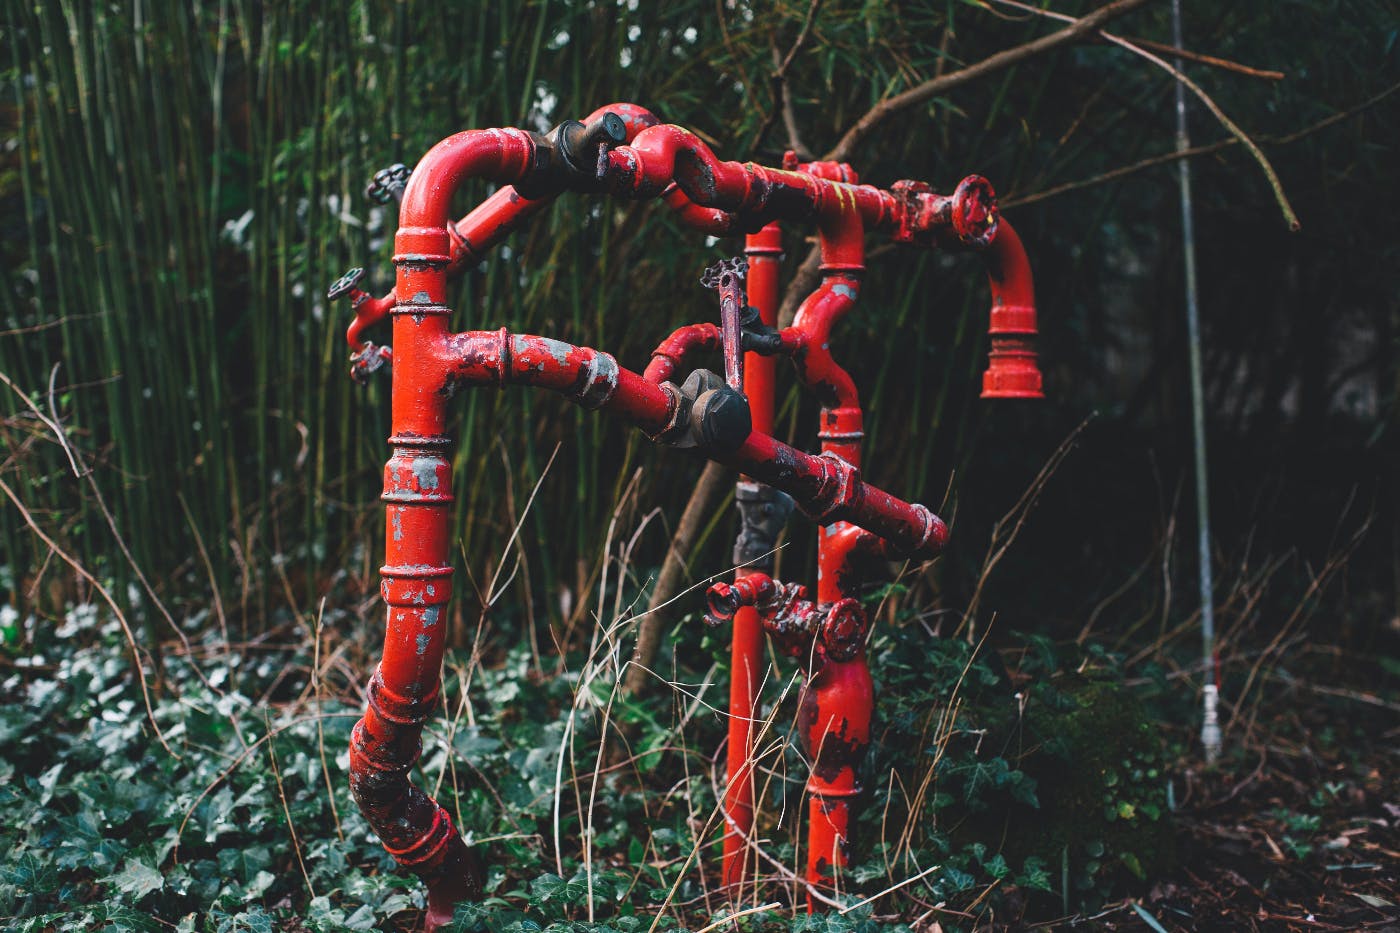 A tangle of old red pipes